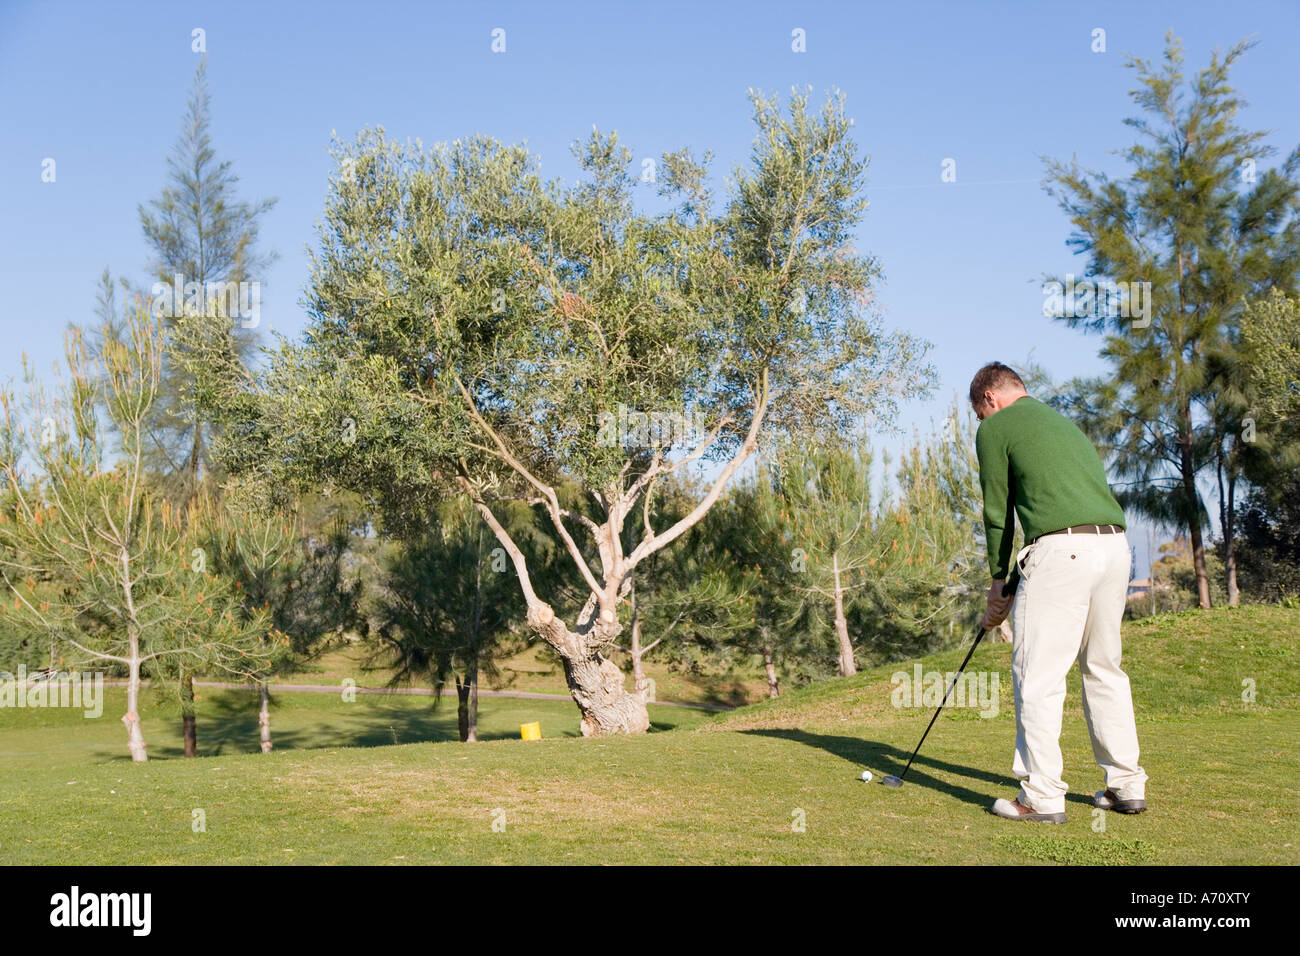 Alhaurin de la Torre Malaga Province inland Costa del Sol Spain Lauro Golf course Addressing the ball before driving from a tee Stock Photo